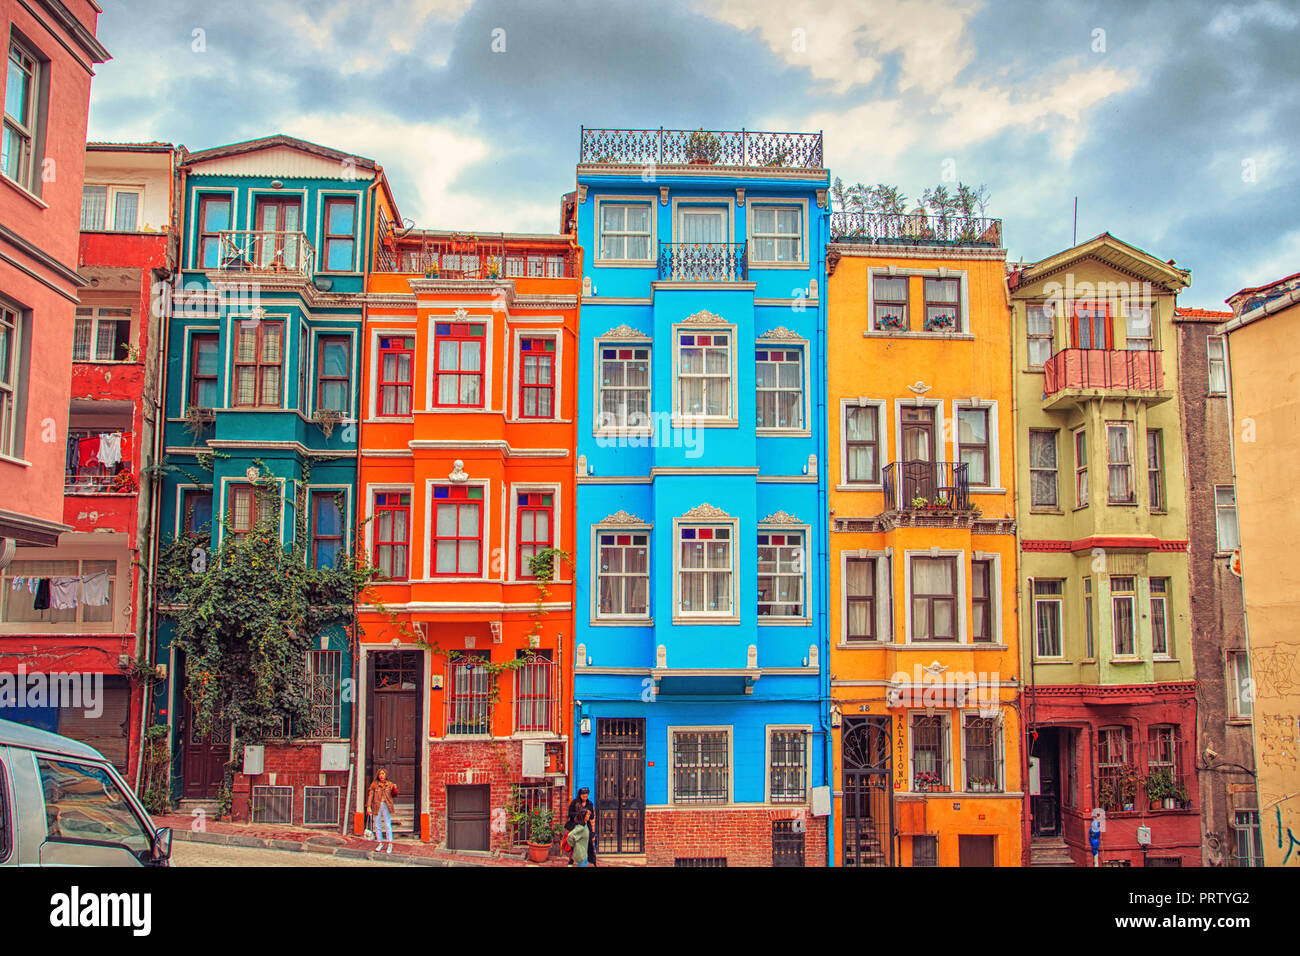 ISTANBUL, TURKEY - September 27, 2018. Colorful houses of the Balat district. Stock Photo